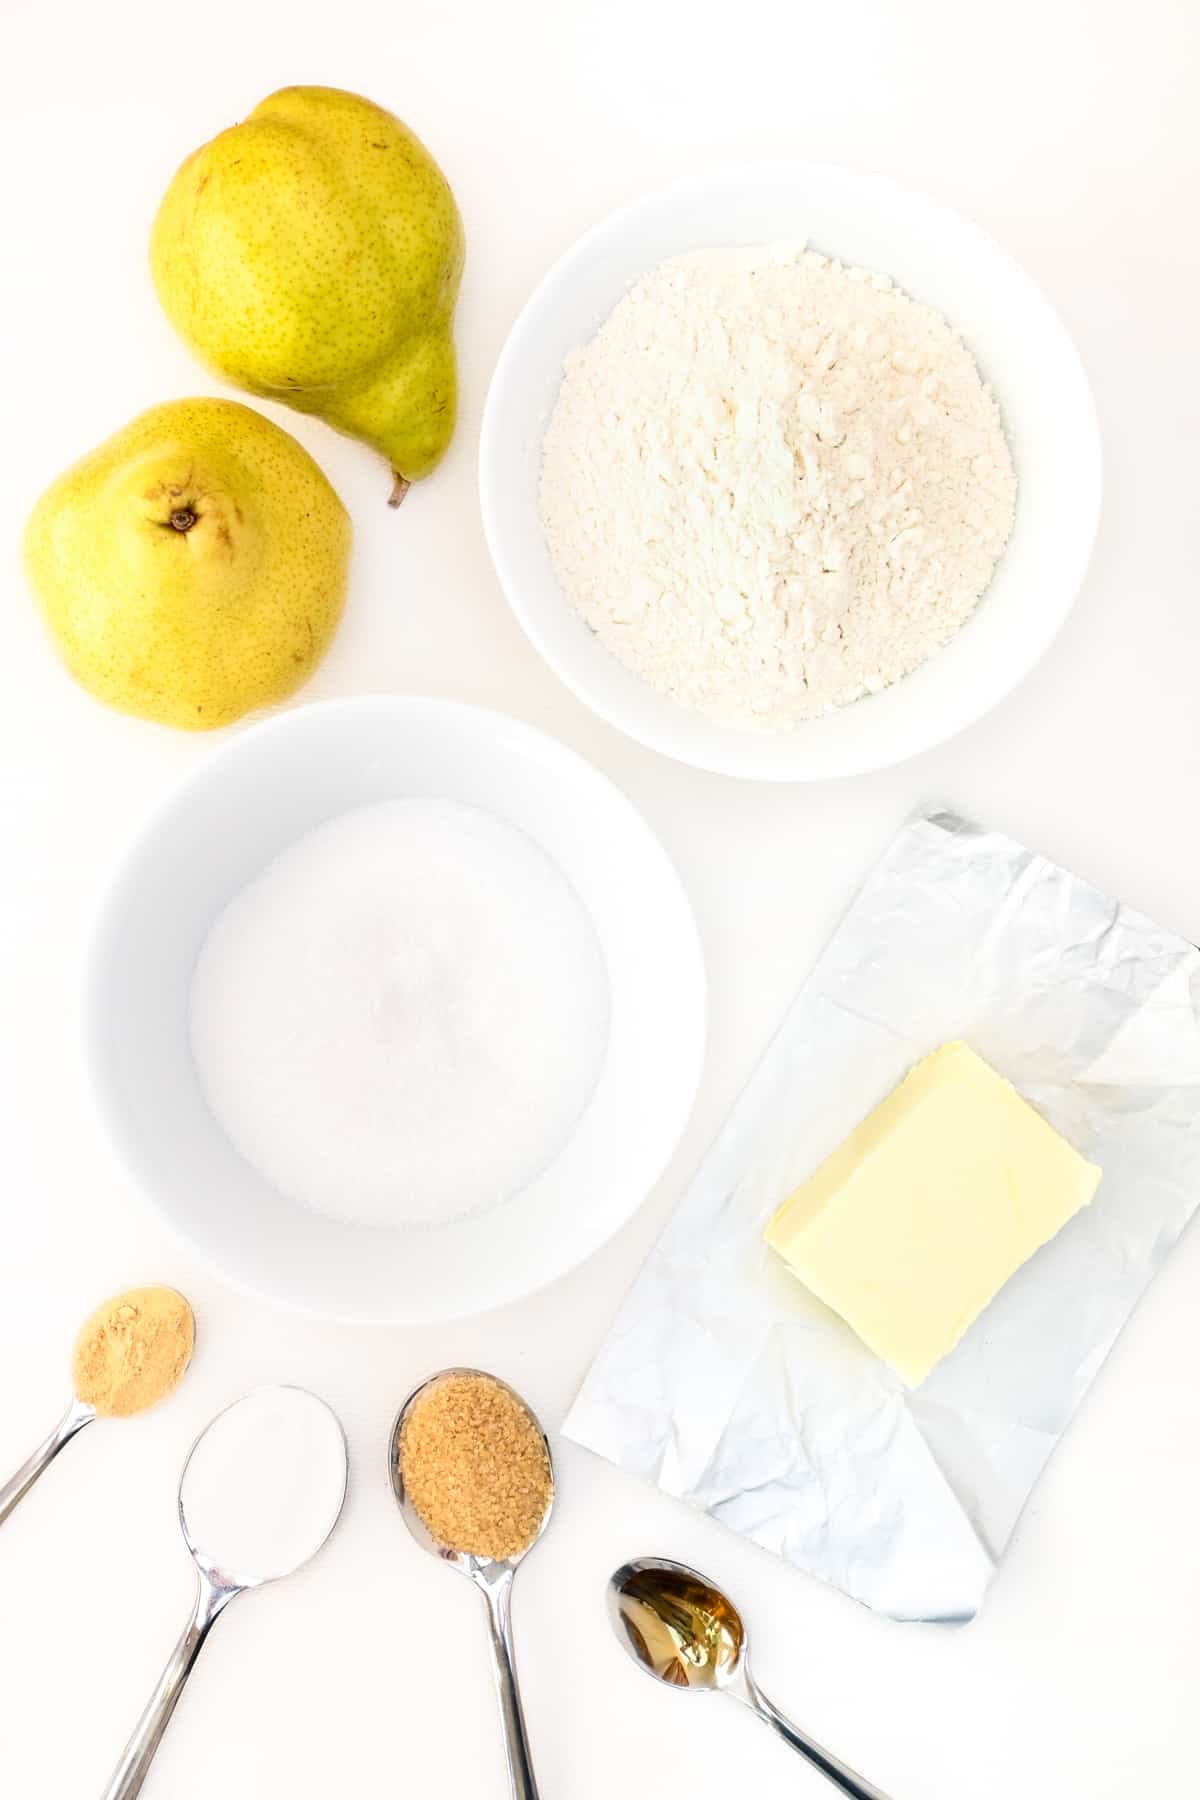 The ingredients for the vegan pear cake recipe laid out on a white surface. Pears, white flour, sugar, vegan butter, baking powder, ground ginger, vanilla extract and demerara sugar.